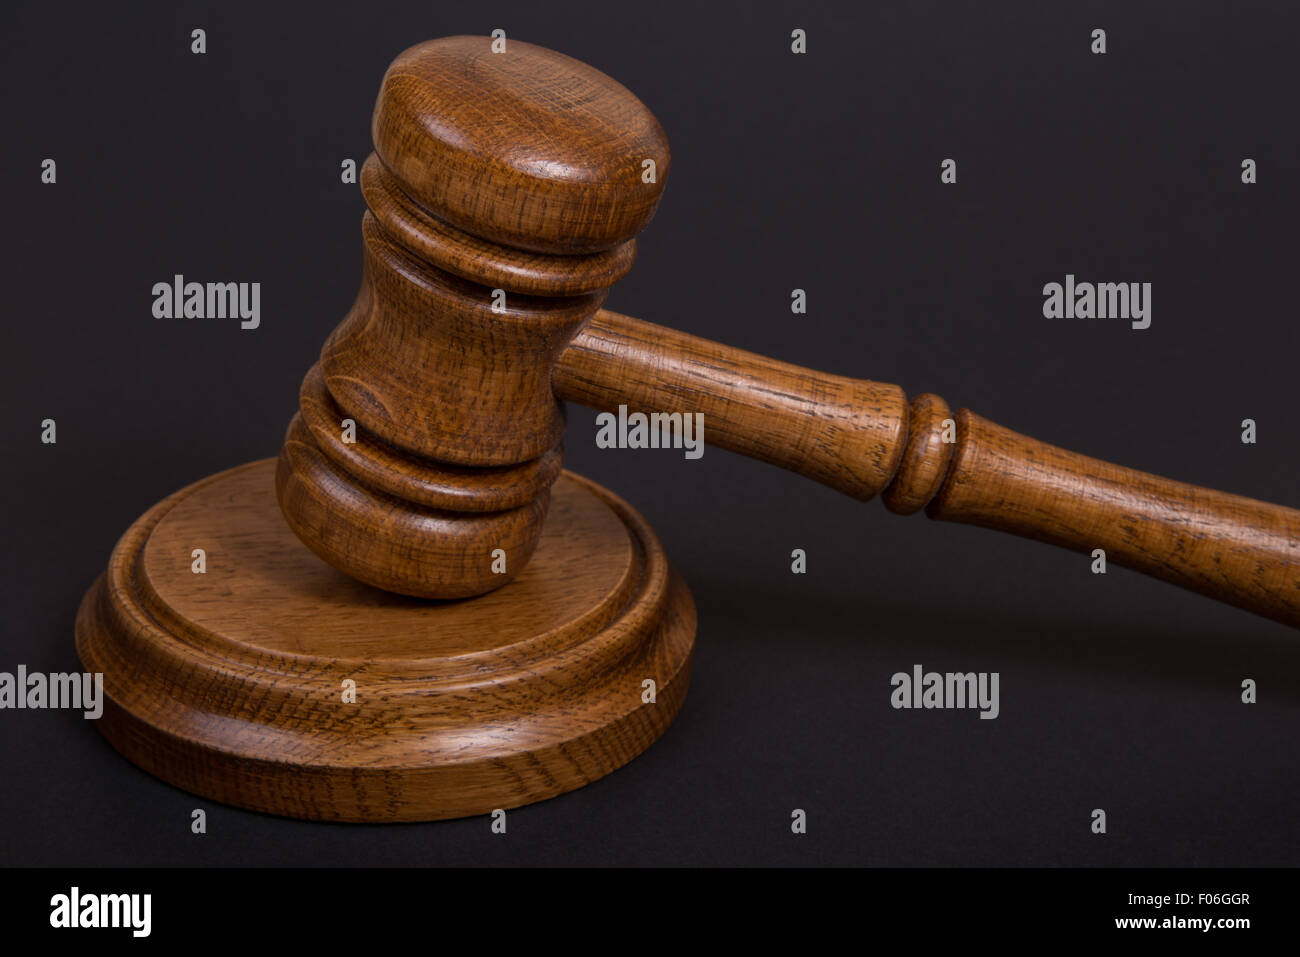 Wooden brown Judges gavel or auction hammer Stock Photo